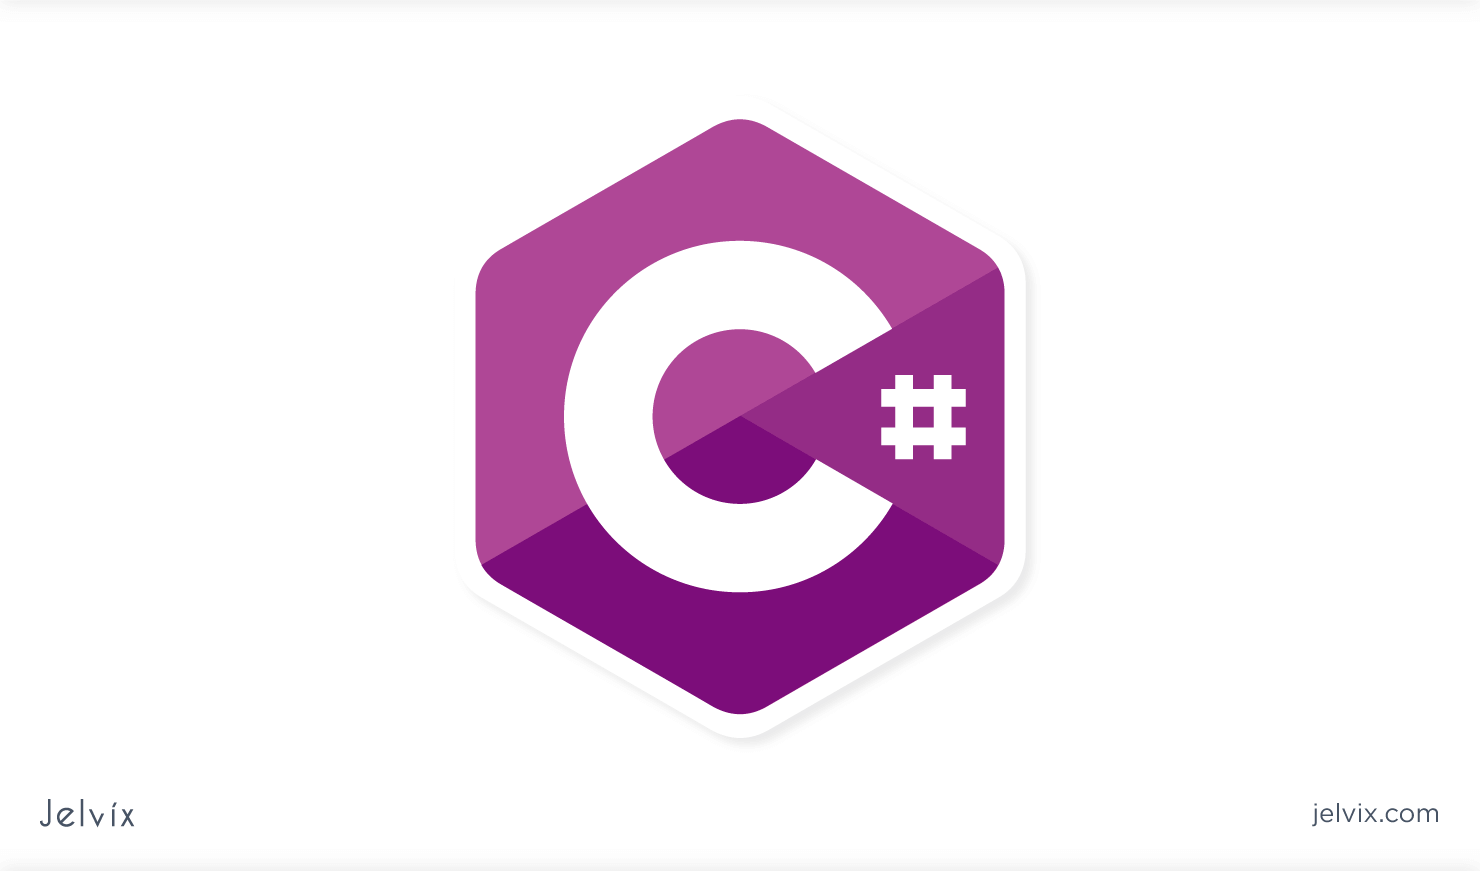 C# for Web Development and Use Cases